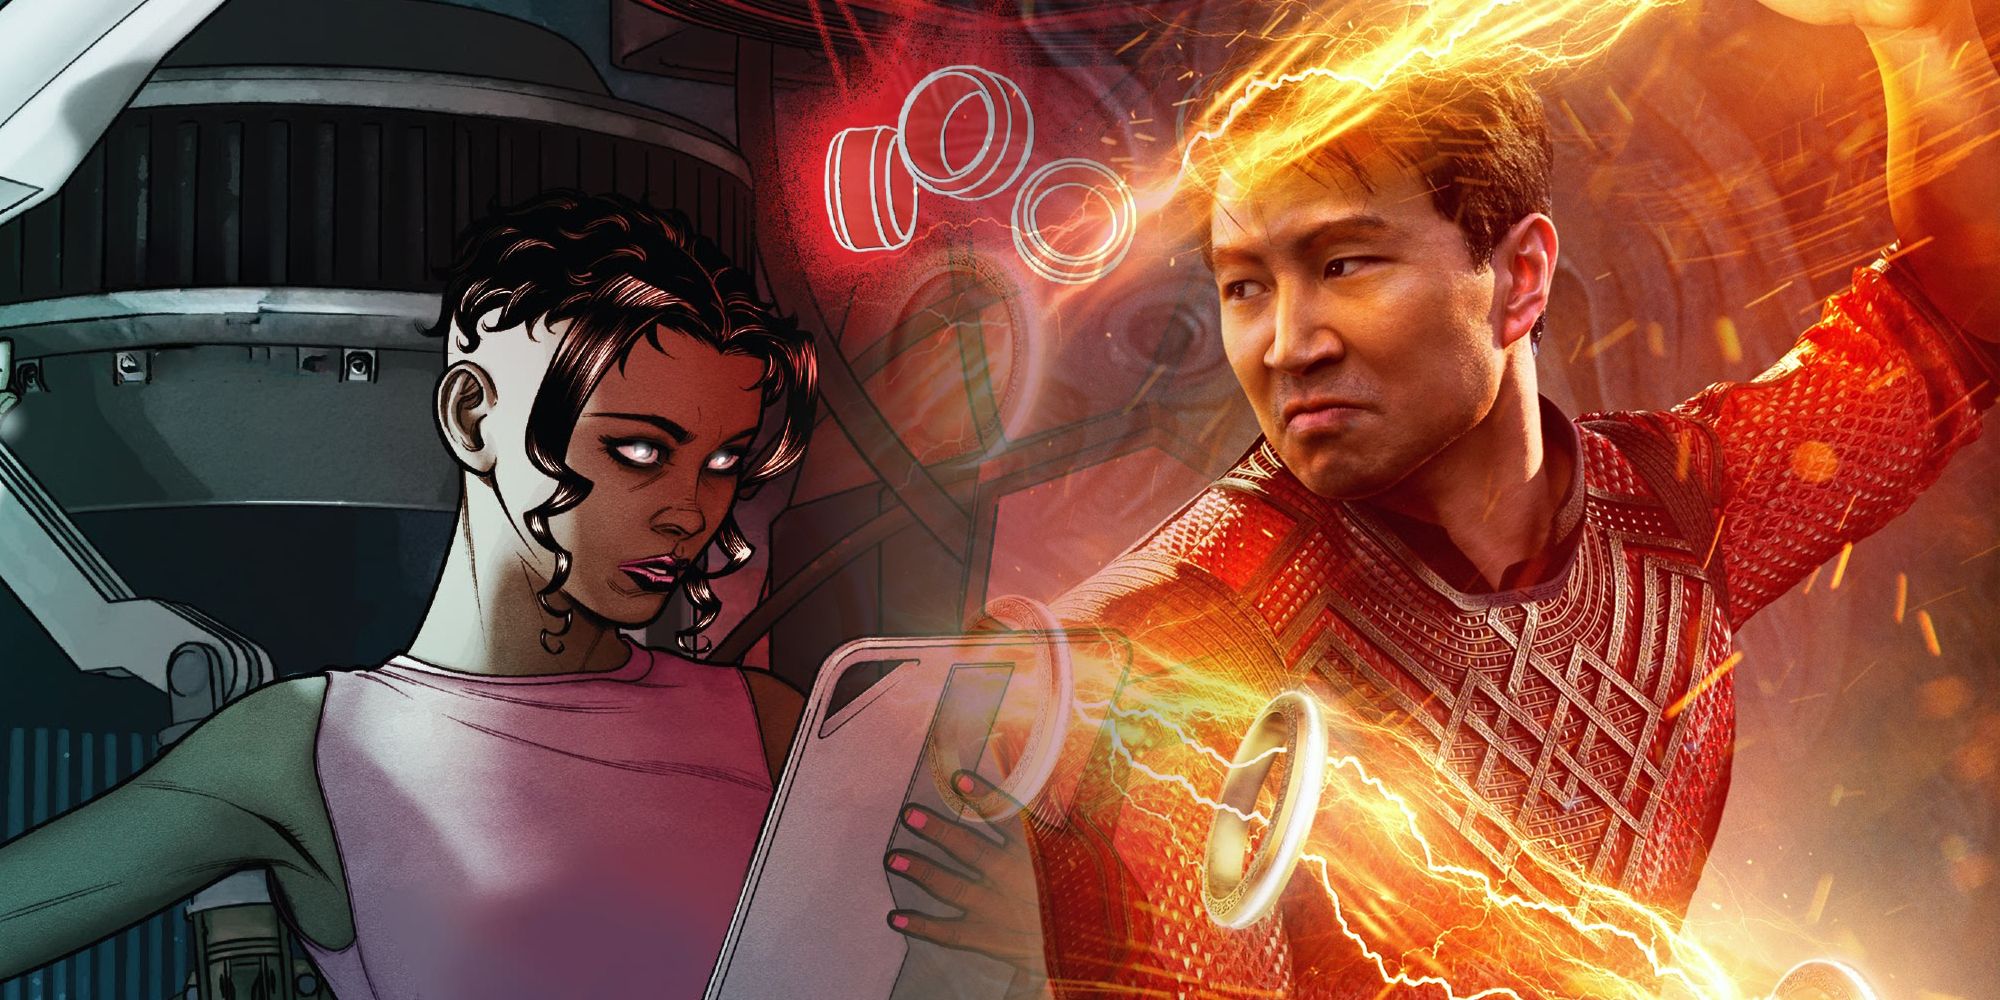 Featured Image:  Ironheart from Marvel Comics (left) and MCU Shang-Chi Simu Liu (right) with the Ten Rings